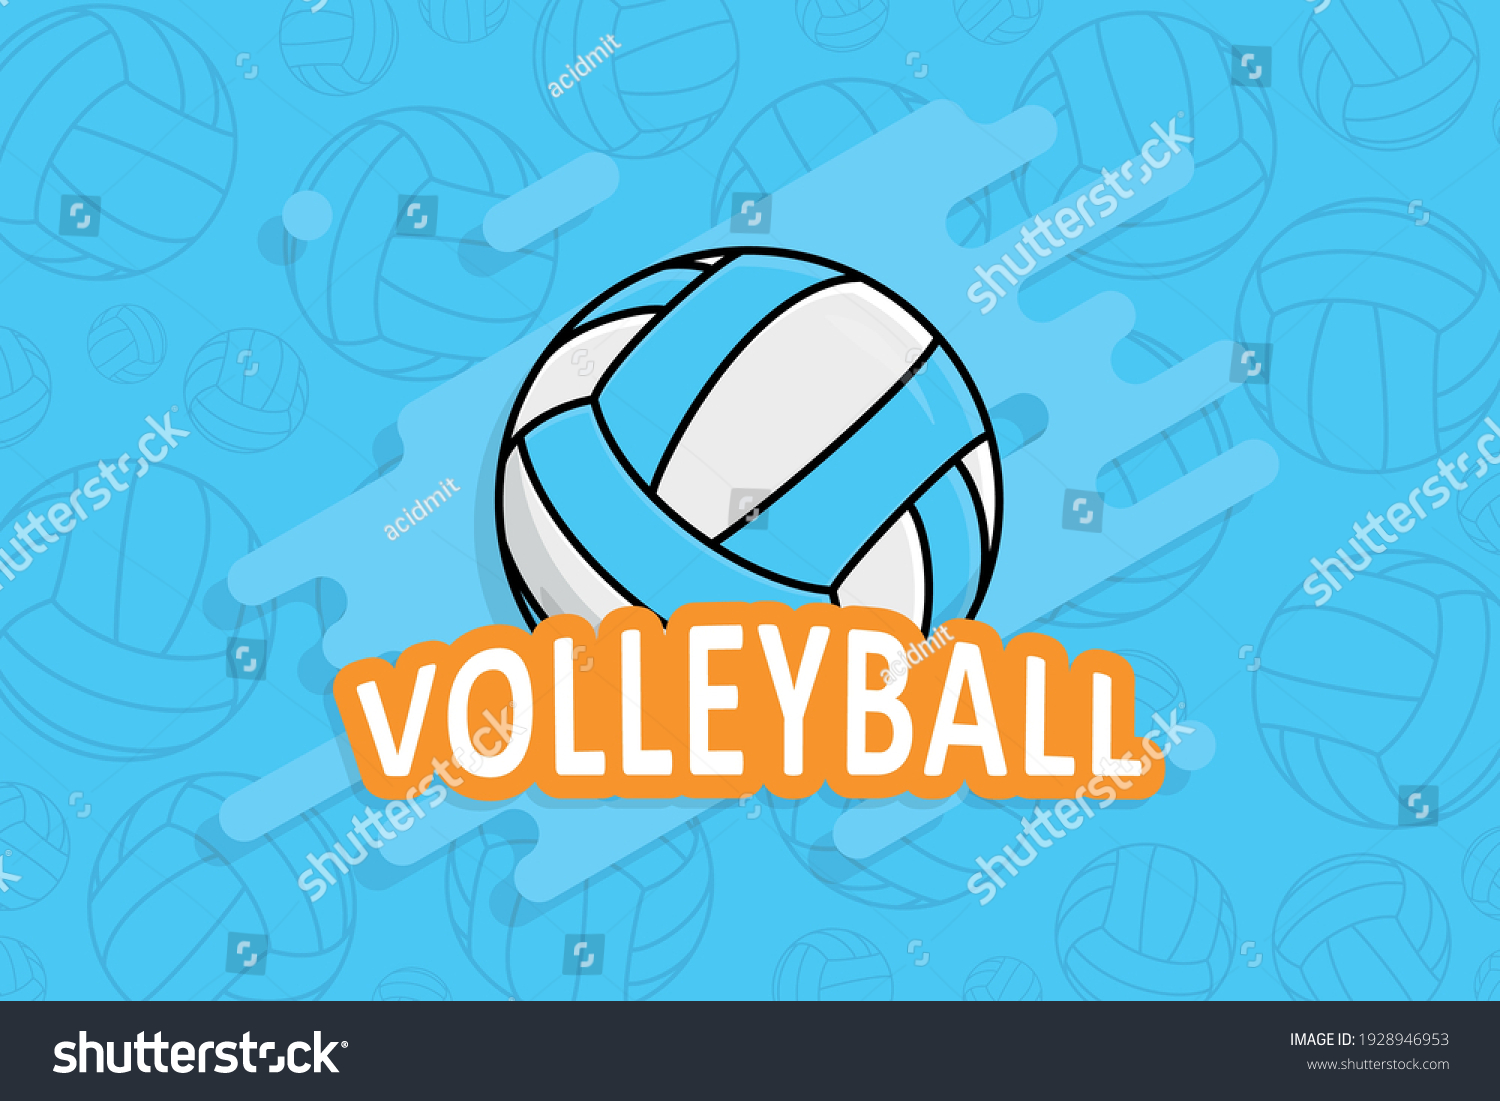 Volleyball Ball Vector Background Flat Style Stock Vector (Royalty Free ...